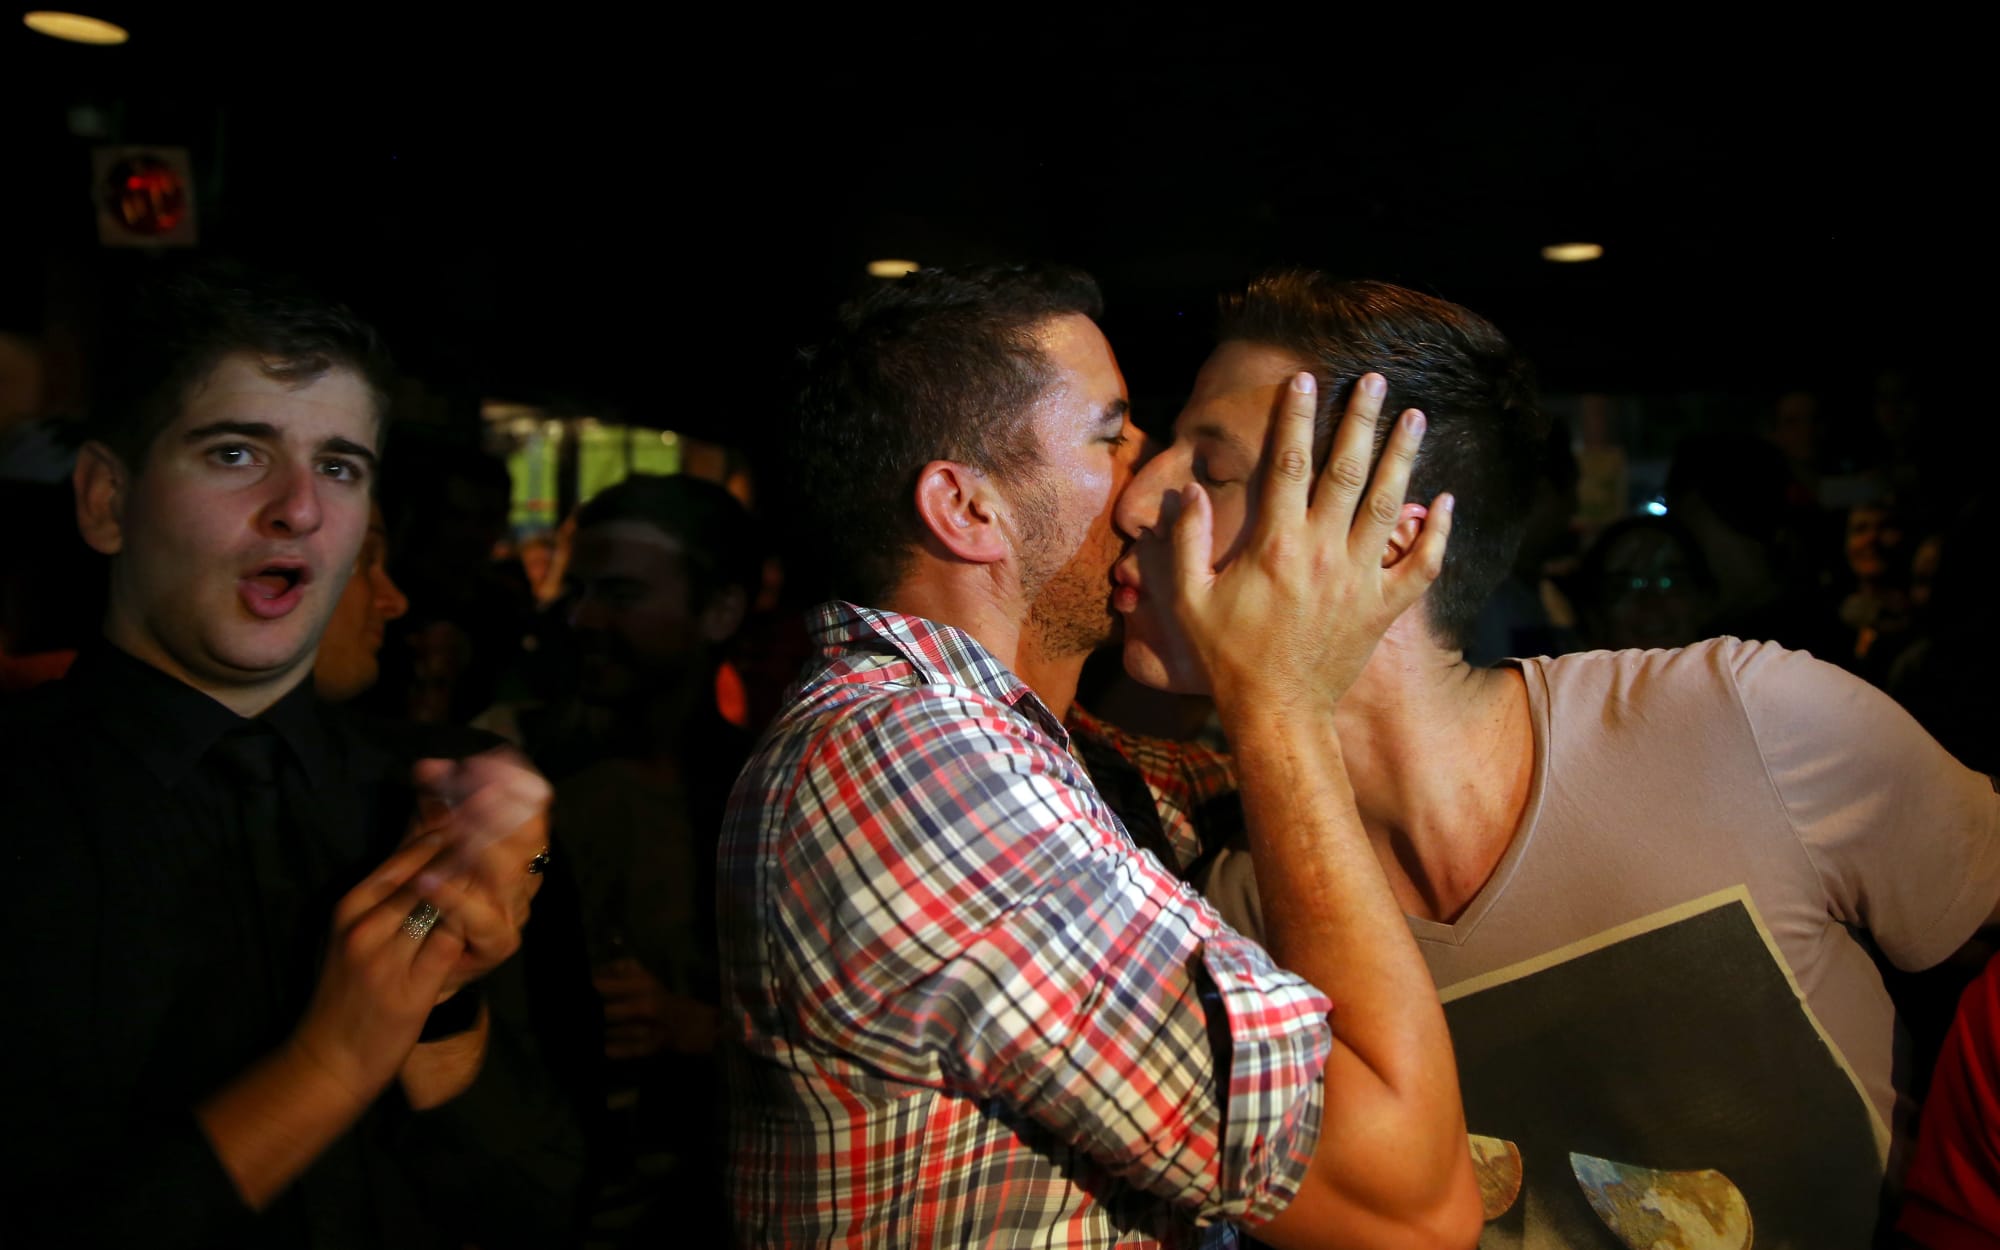 Marriage equality supporters celebrate in an Auckland bar after Louisa Wall's Marriage Equality Bill passes into law in 2013